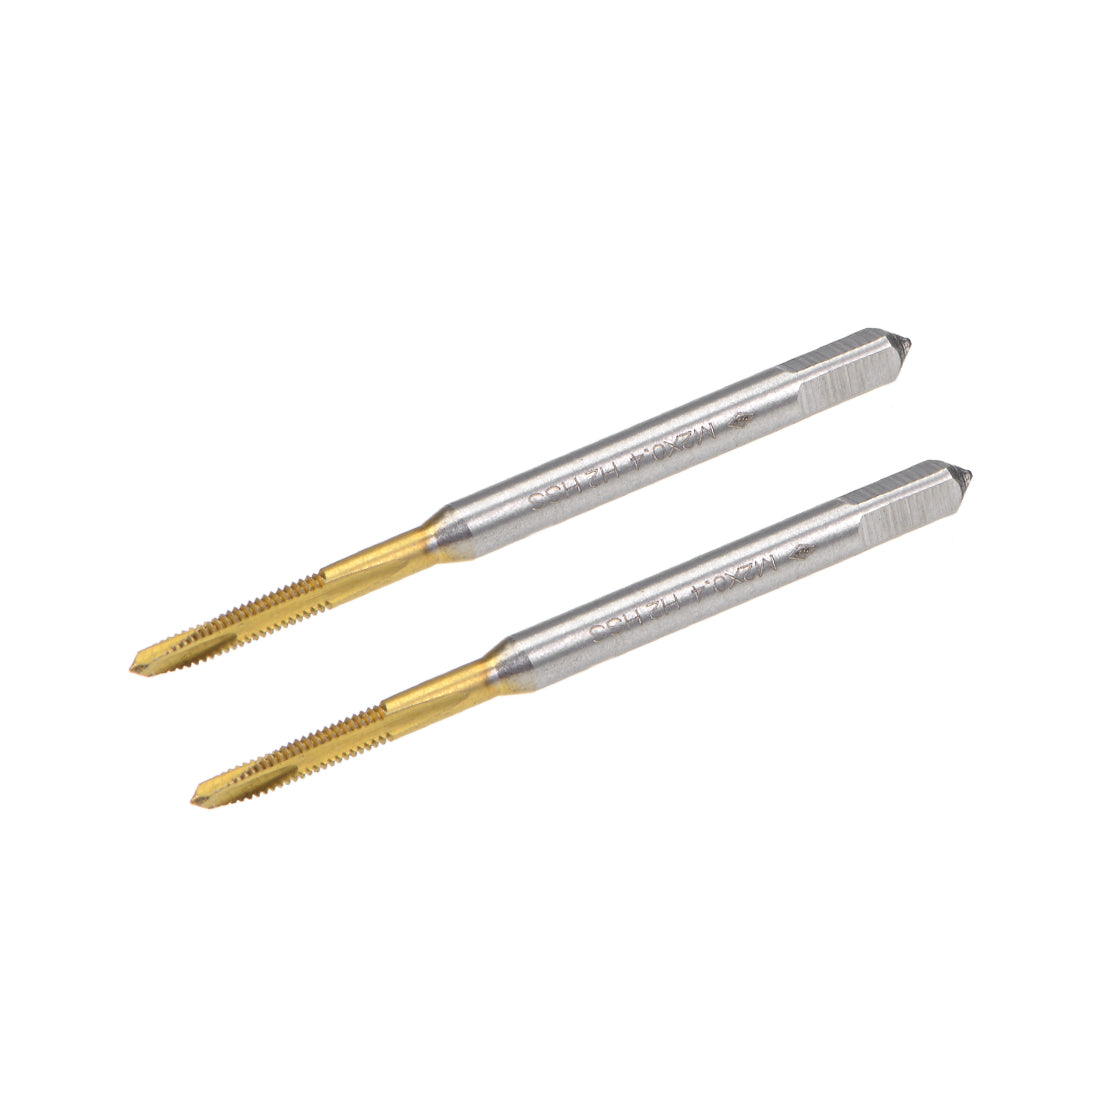 uxcell Uxcell Spiral Point Threading Tap M2 Thread 0.4 Pitch Titanium Coated HSS 2pcs